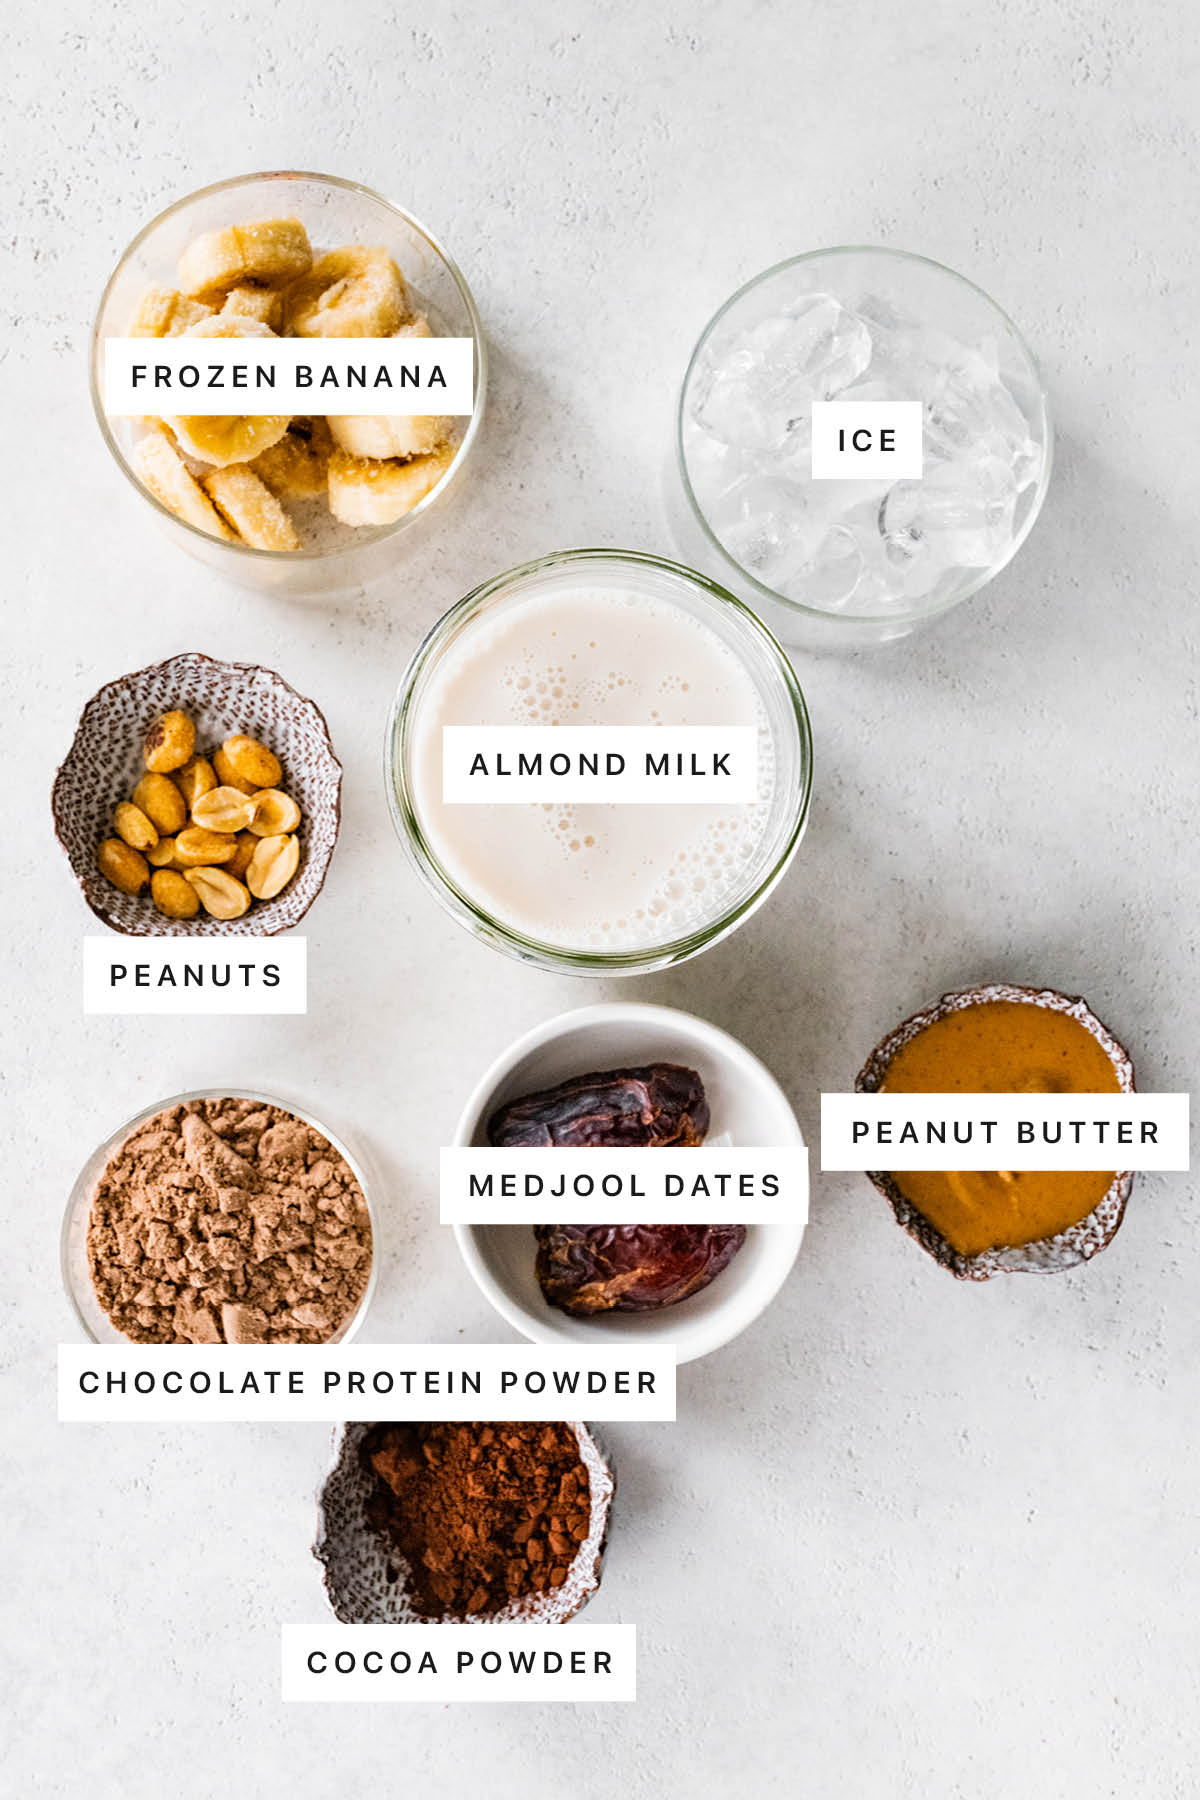 Ingredients measured out to make Snickers Protein Smoothie: frozen banana, ice, almond milk, peanuts, medjool dates, chocolate protein powder, peanut butter and cocoa powder.